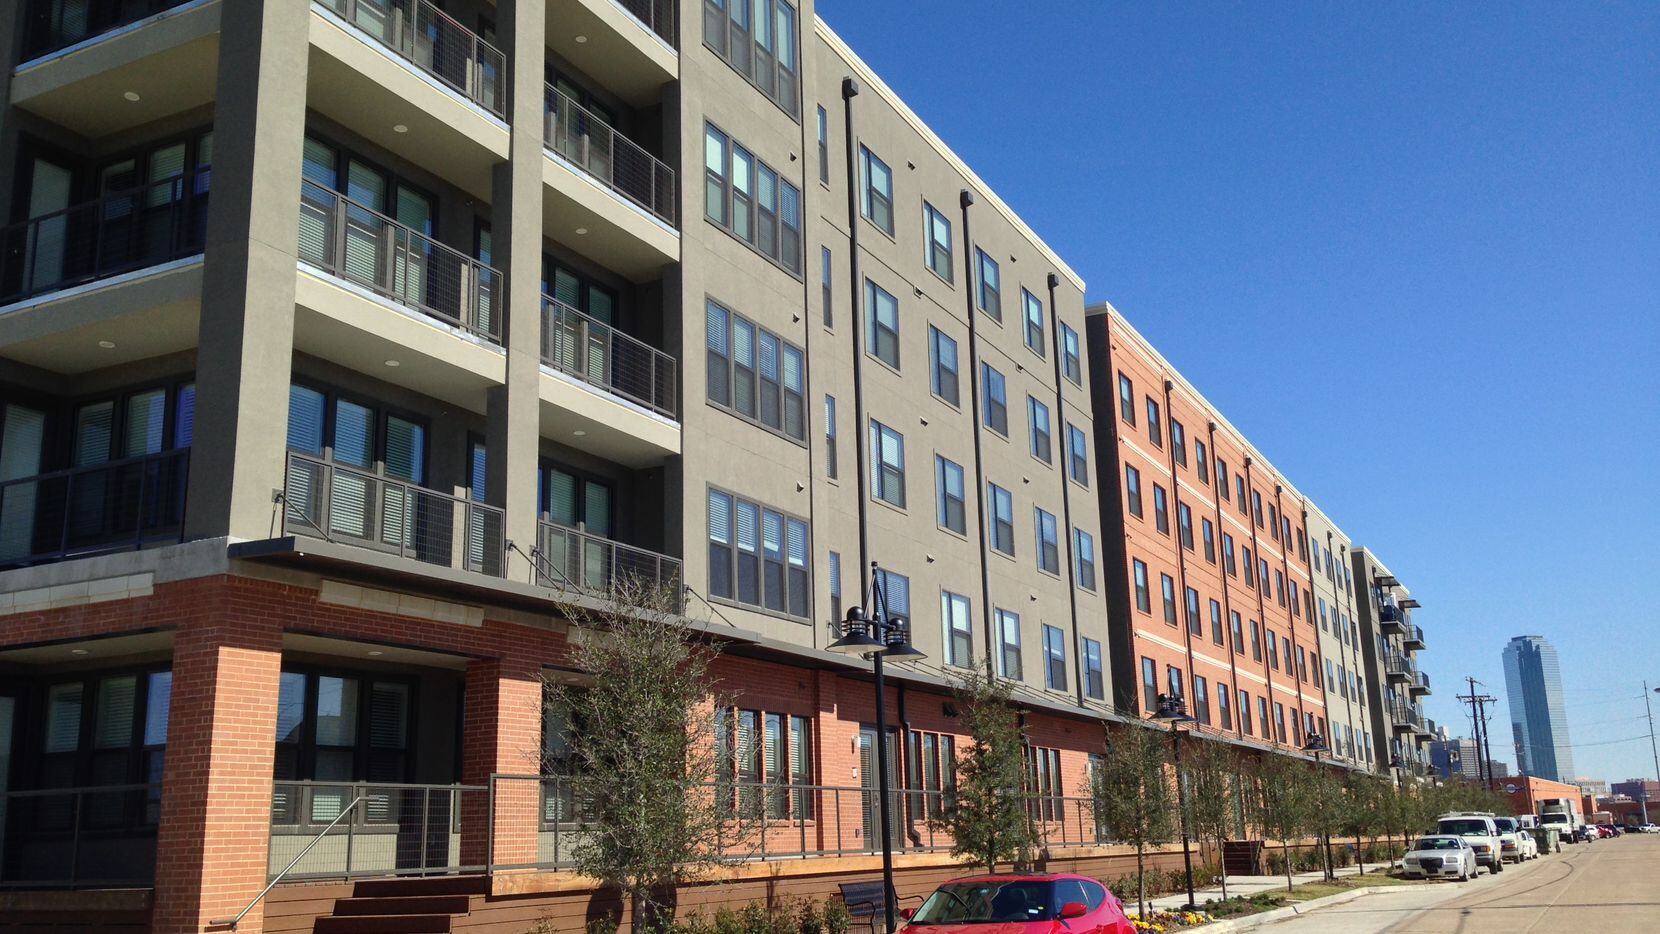 The new Alexan Riveredge apartments are on Levee Street on the banks of the Trinity River.